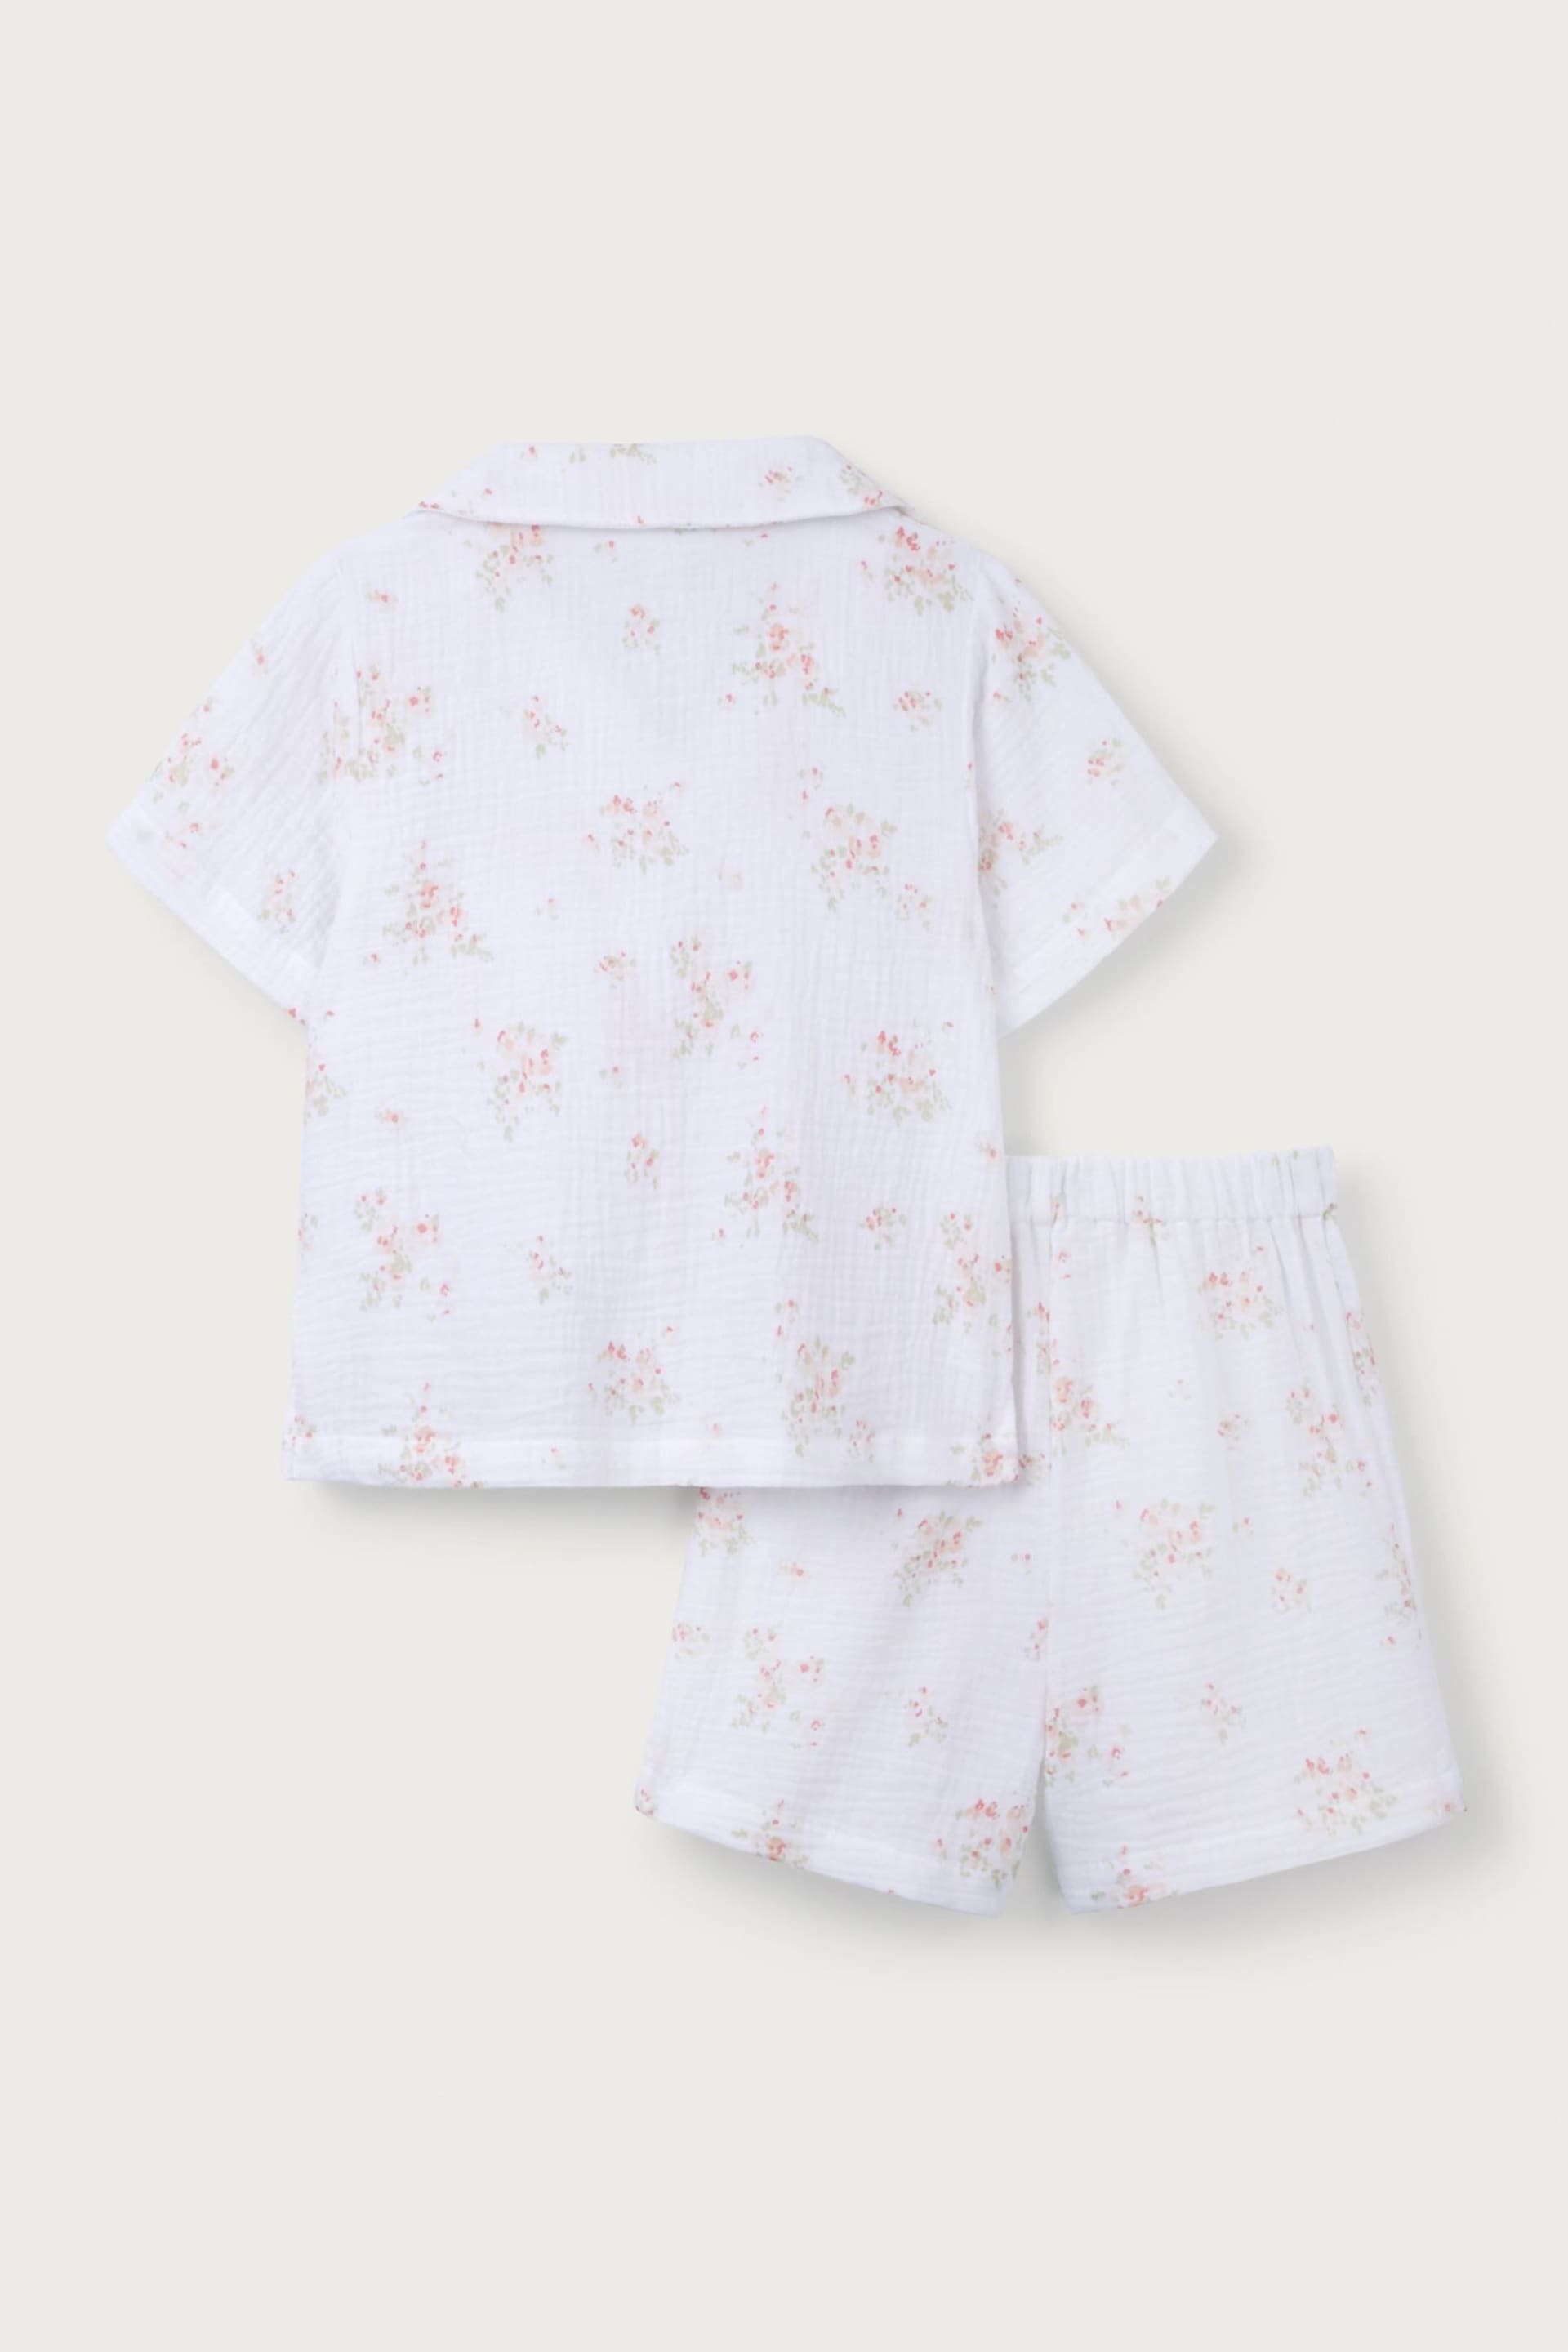 The White Company Cotton Vintage Floral Classic Shortie White Pyjamas - Image 5 of 6